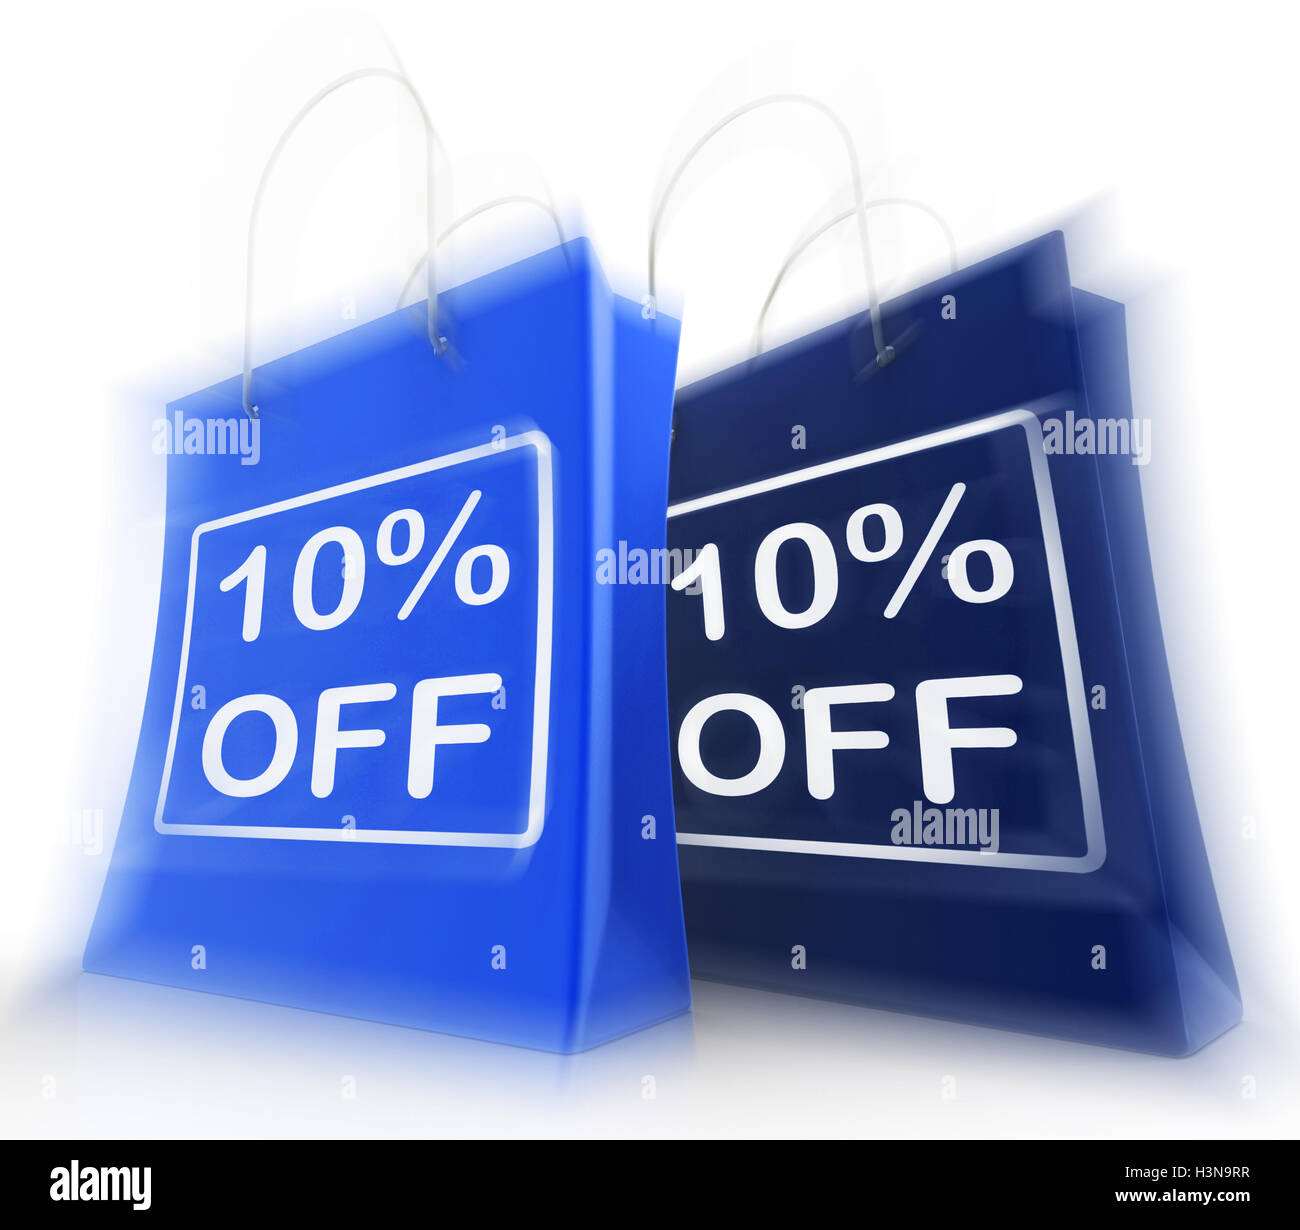 Ten Percent Off On Bags Shows 10 Bargains Stock Photo